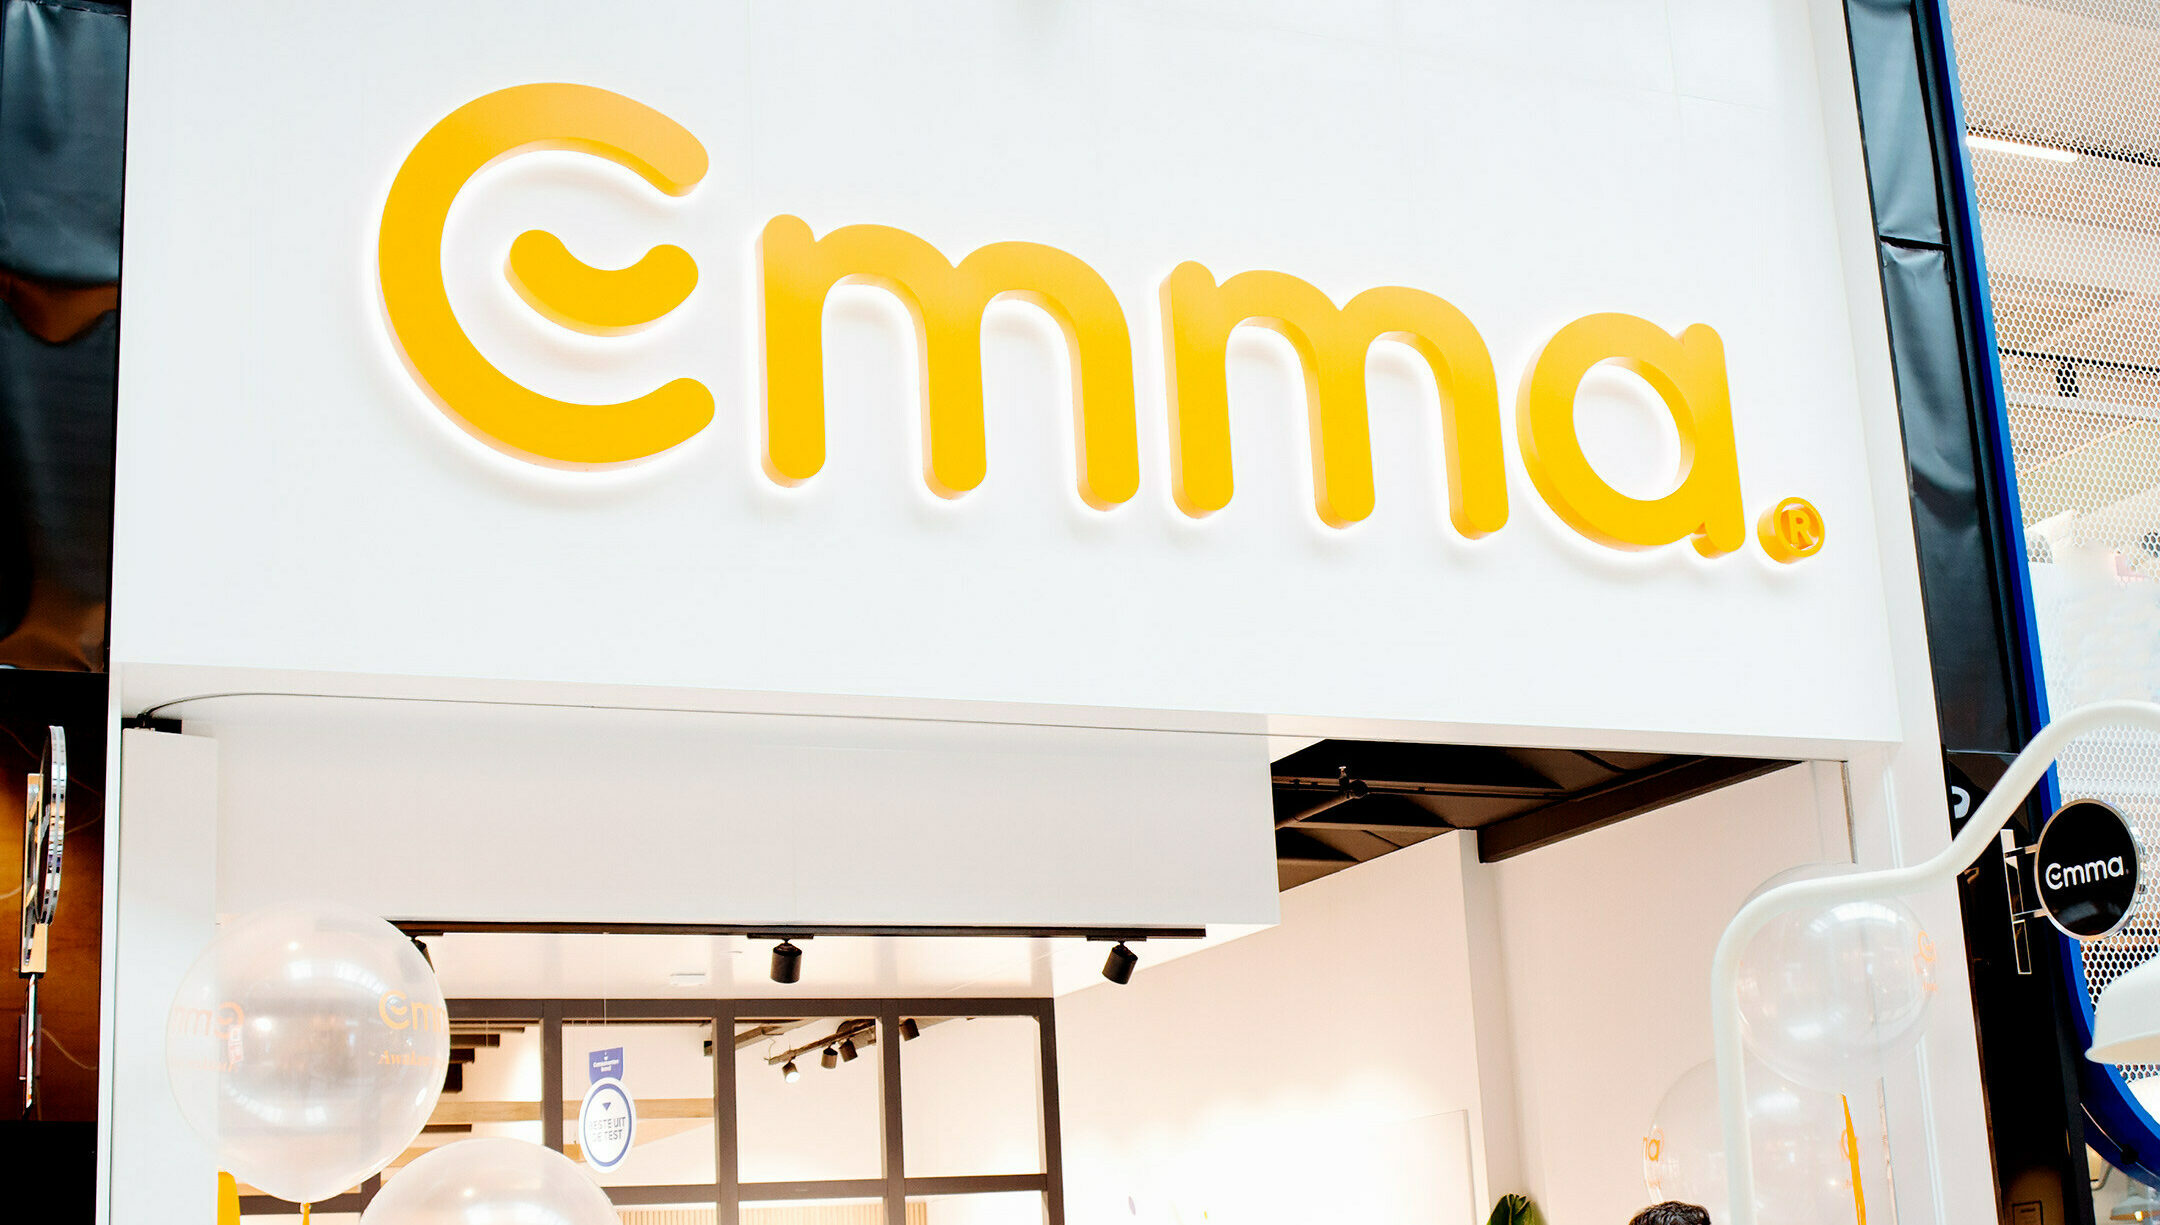 Emma's first European store has opened in the Netherlands